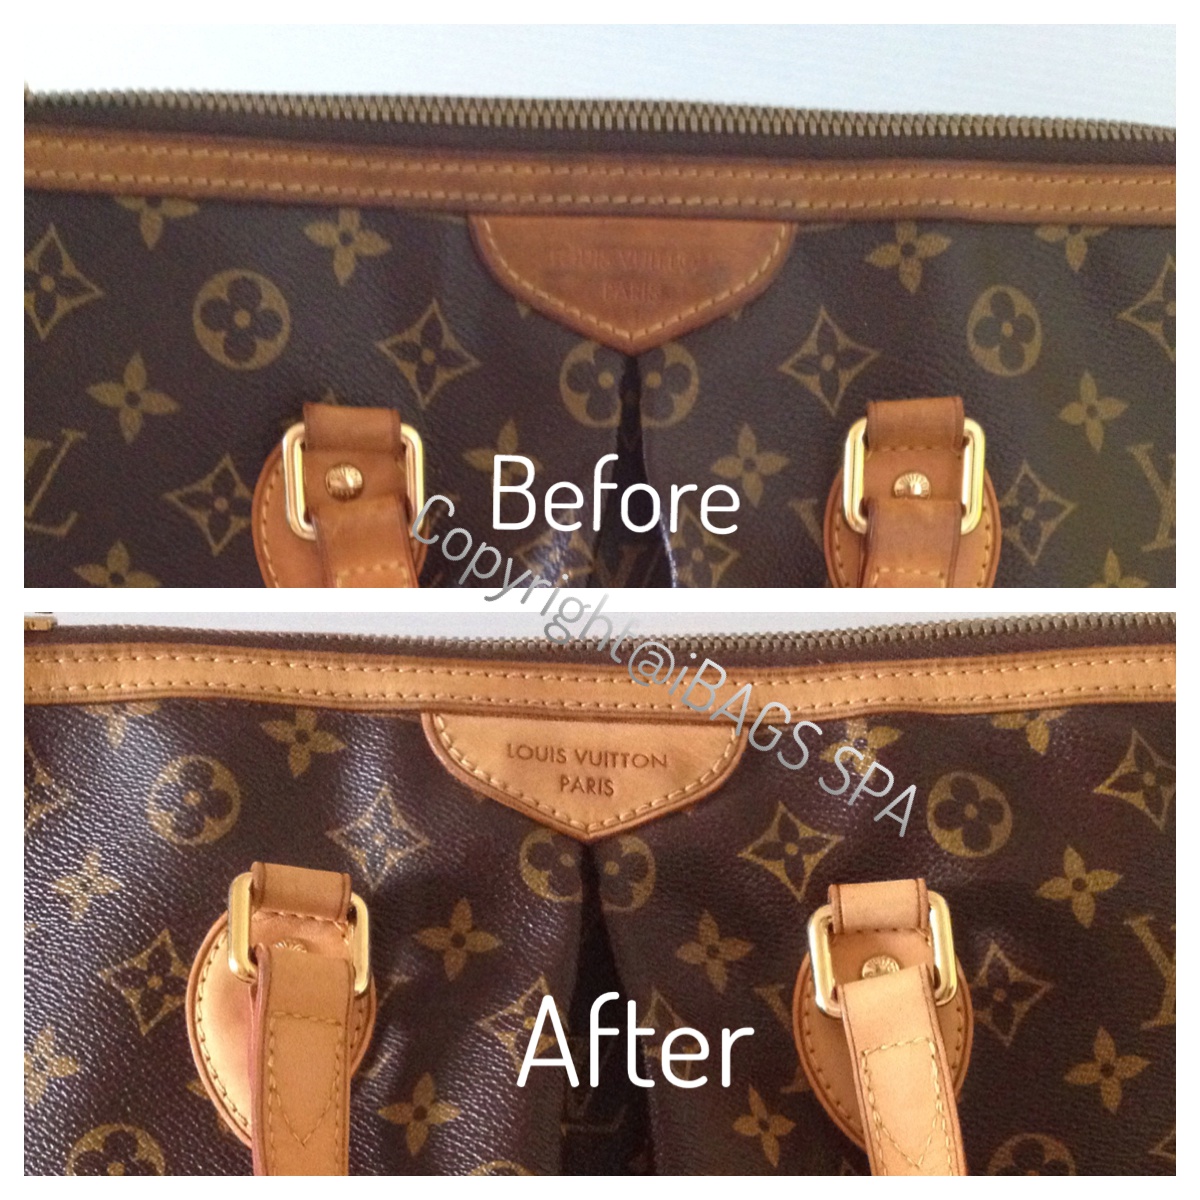 Hyper Bag Spa Sarawak - HBSS, the leaders in Vachetta leather services.  Pictured is a Louis Vuitton Alma with cowhide that was badly darkened and  rough to touch throughout, with staining and